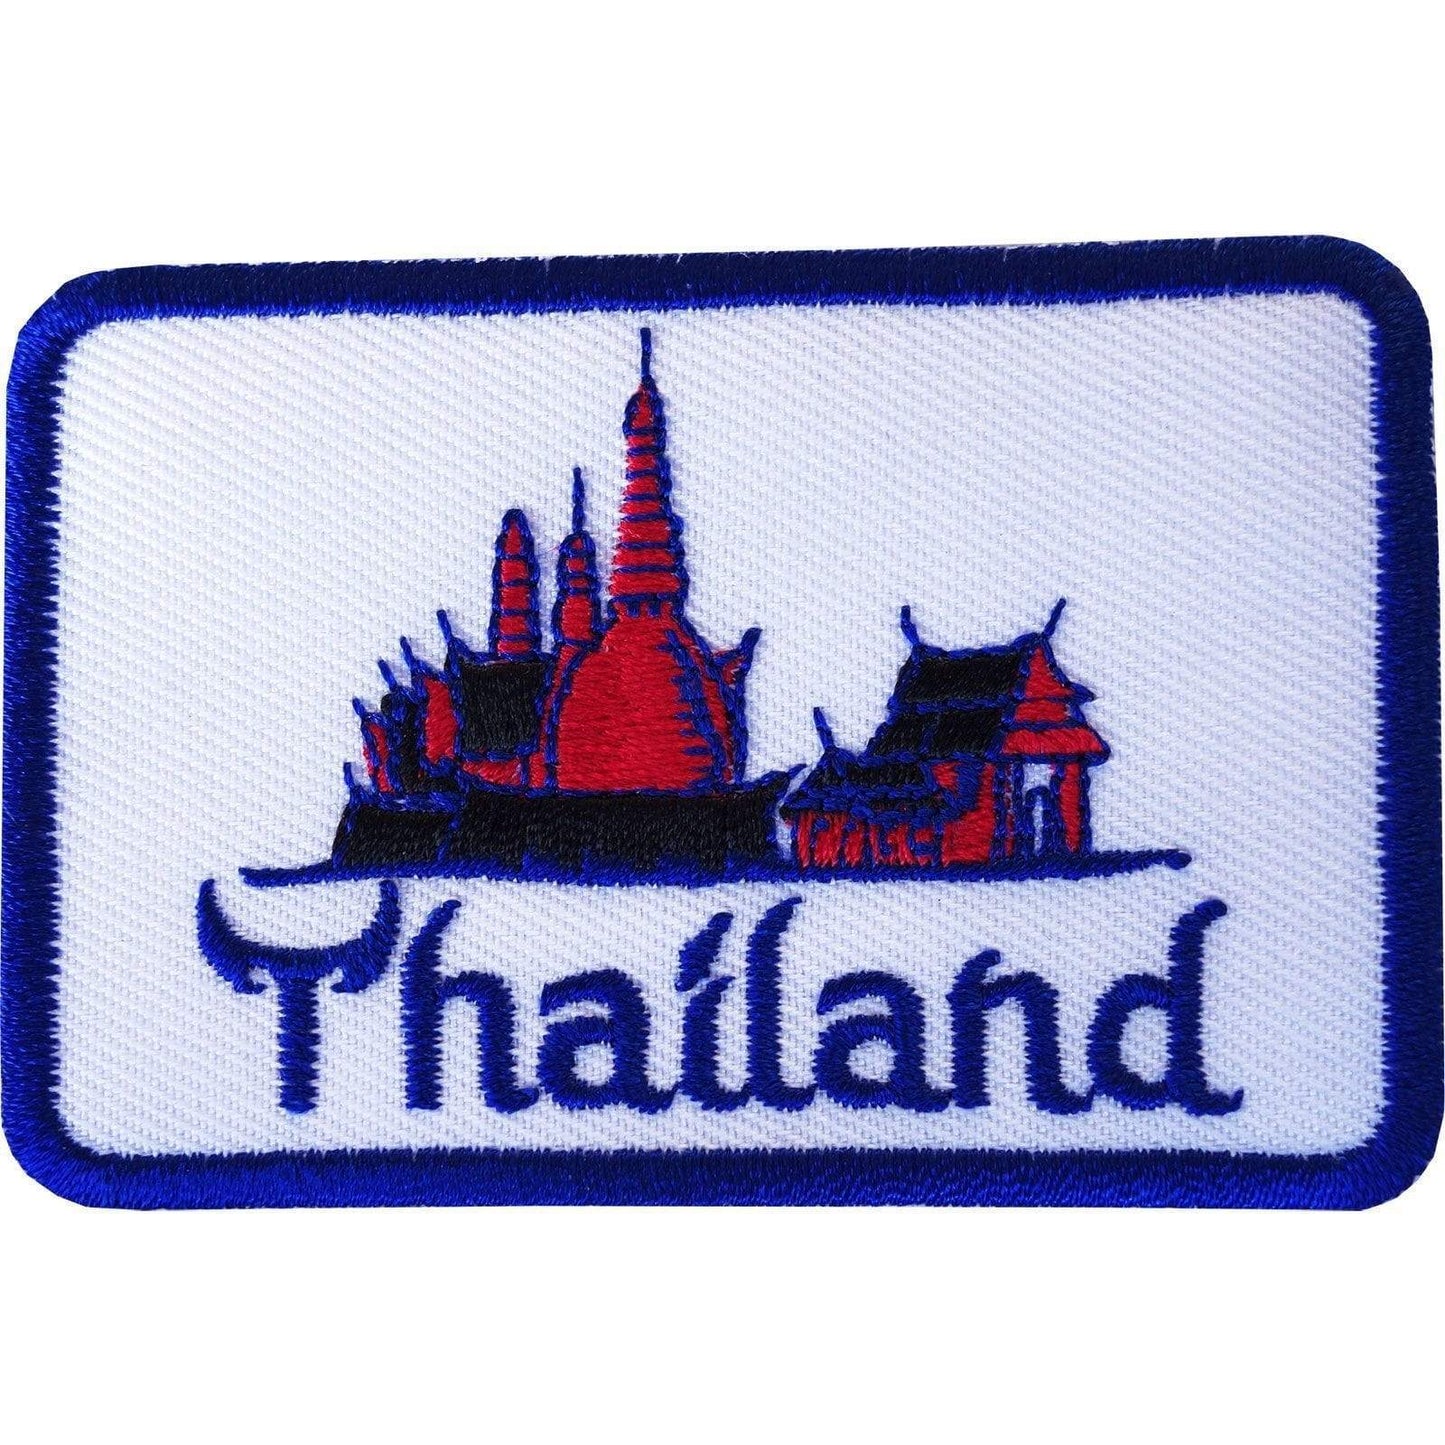 Thailand Patch Iron Sew On Cloth Bag Jeans Jacket T Shirt Thai Embroidered Badge